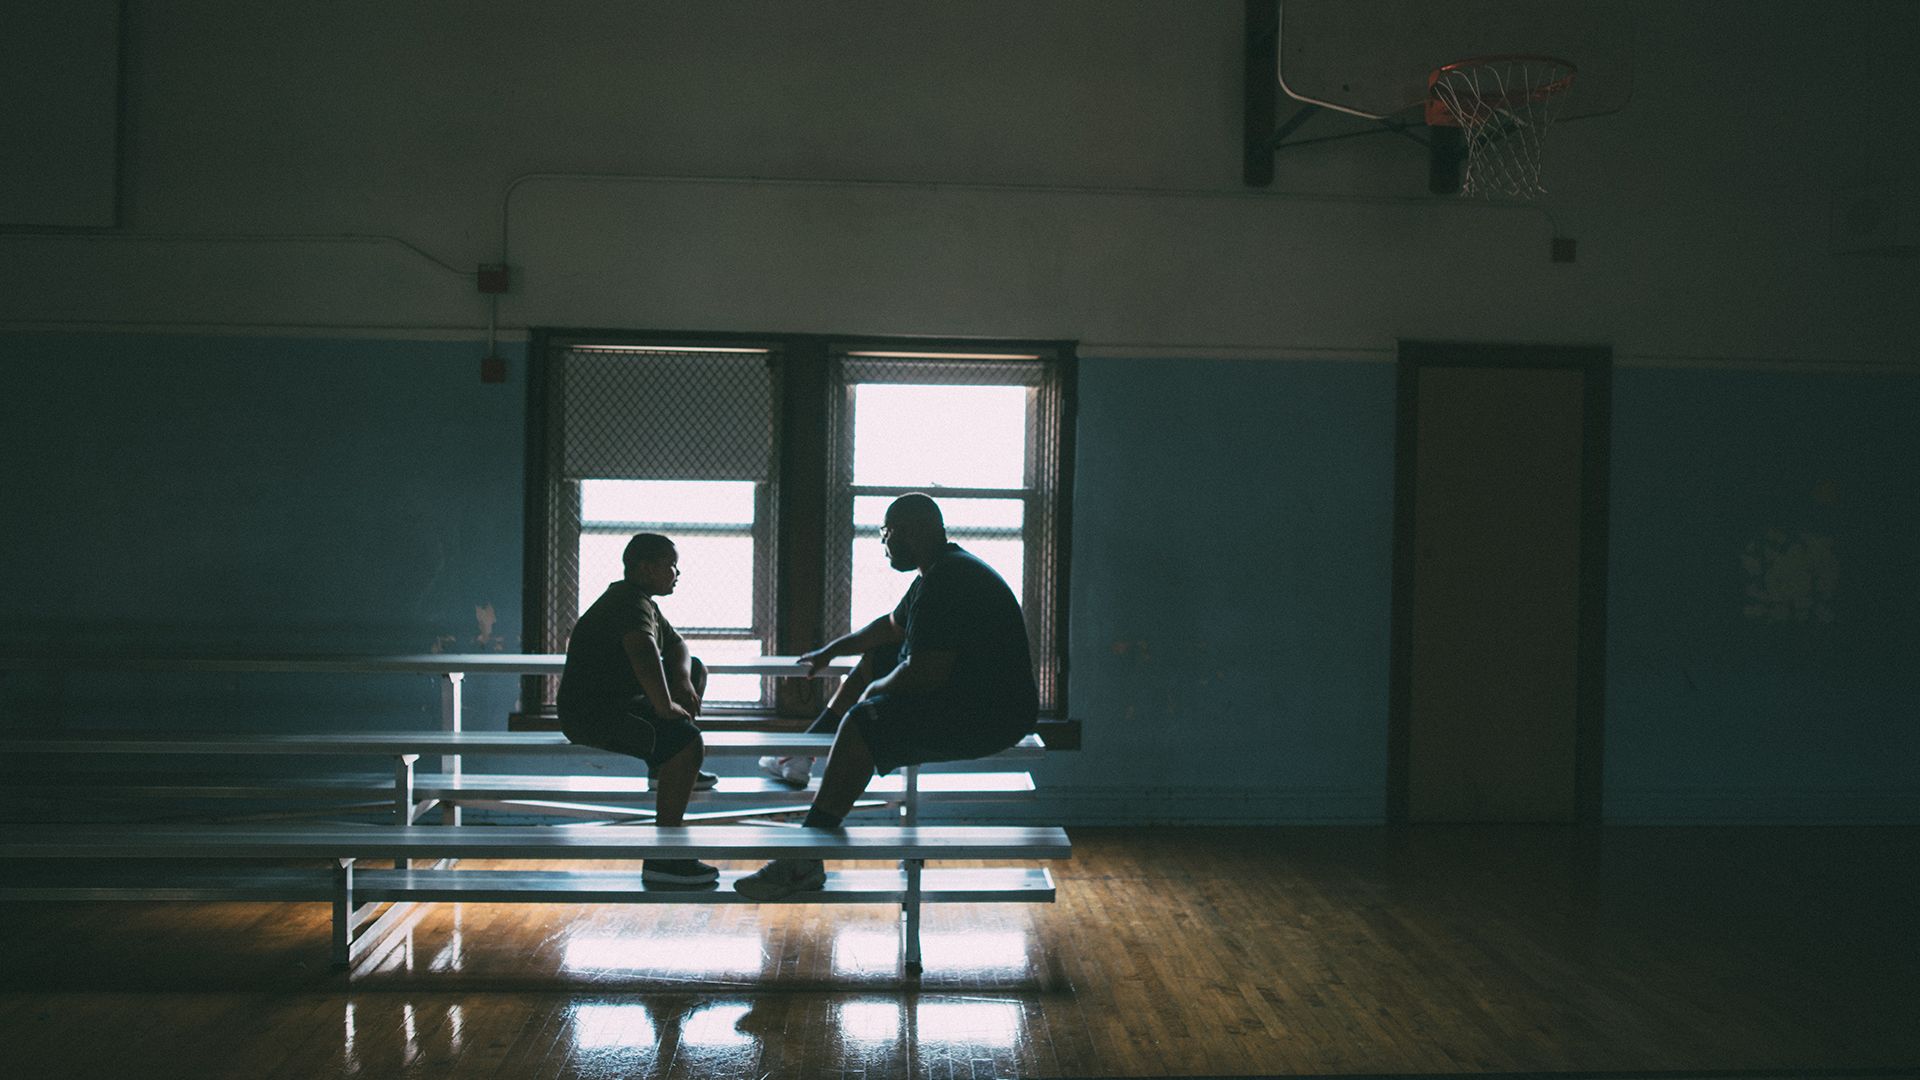 Mentor and youth in conversation in a basketball gym